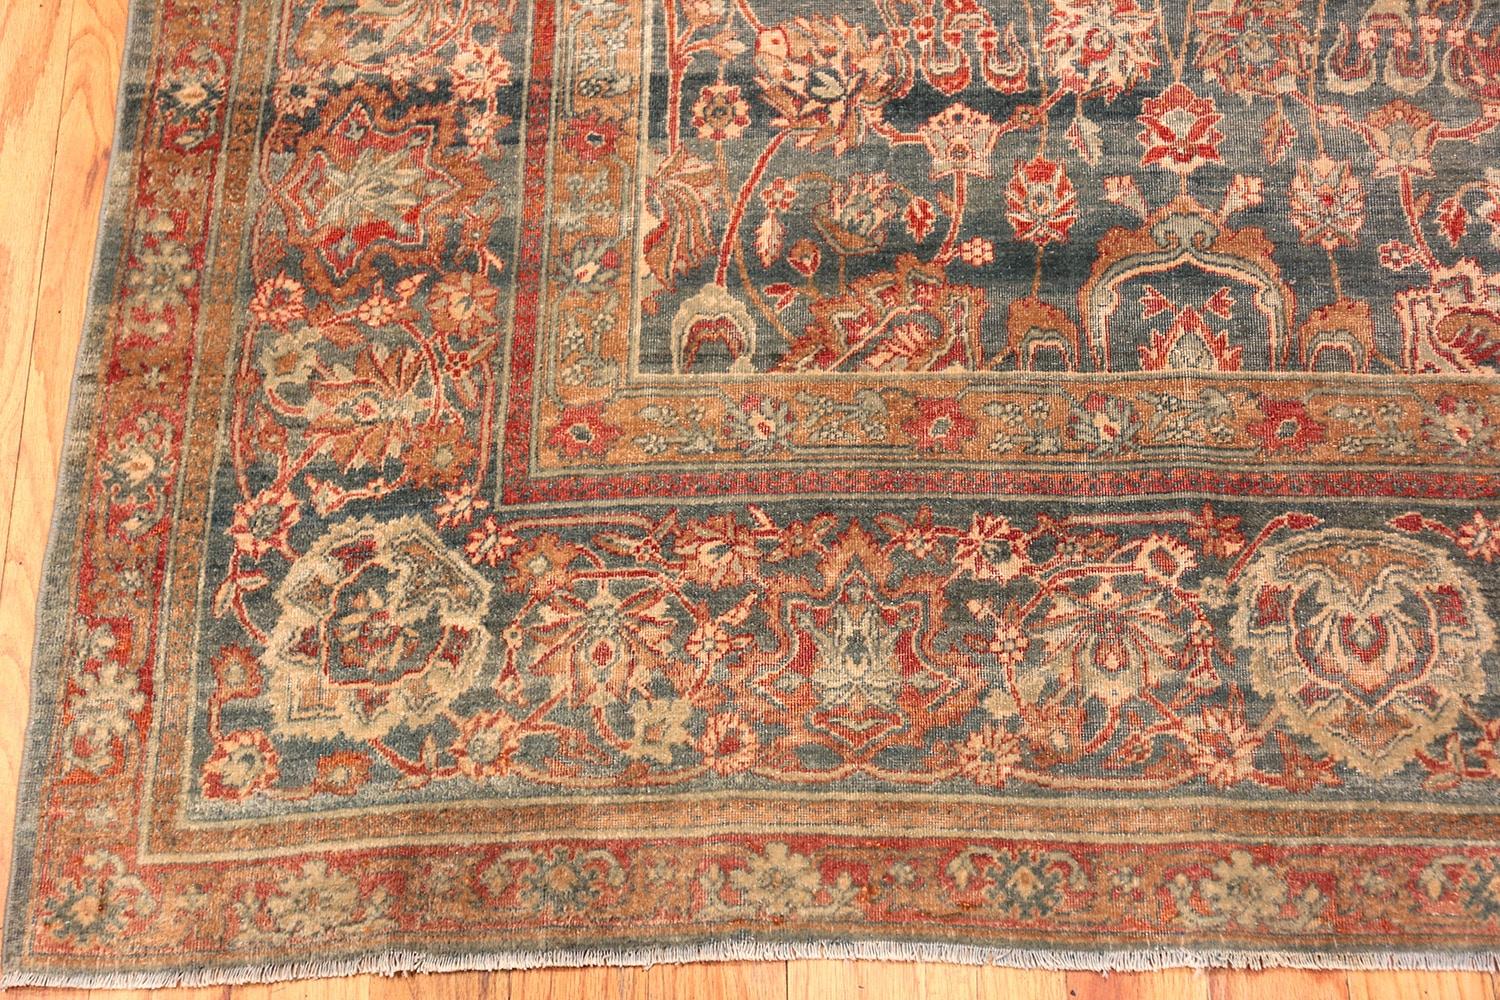 Beautifully abrashed blue antique Persian Kerman rug, country of origin or rug type: Persian rugs, circa 1900. Size: 9 ft 11 in x 11 ft 8 in (3.02 m x 3.56 m)

